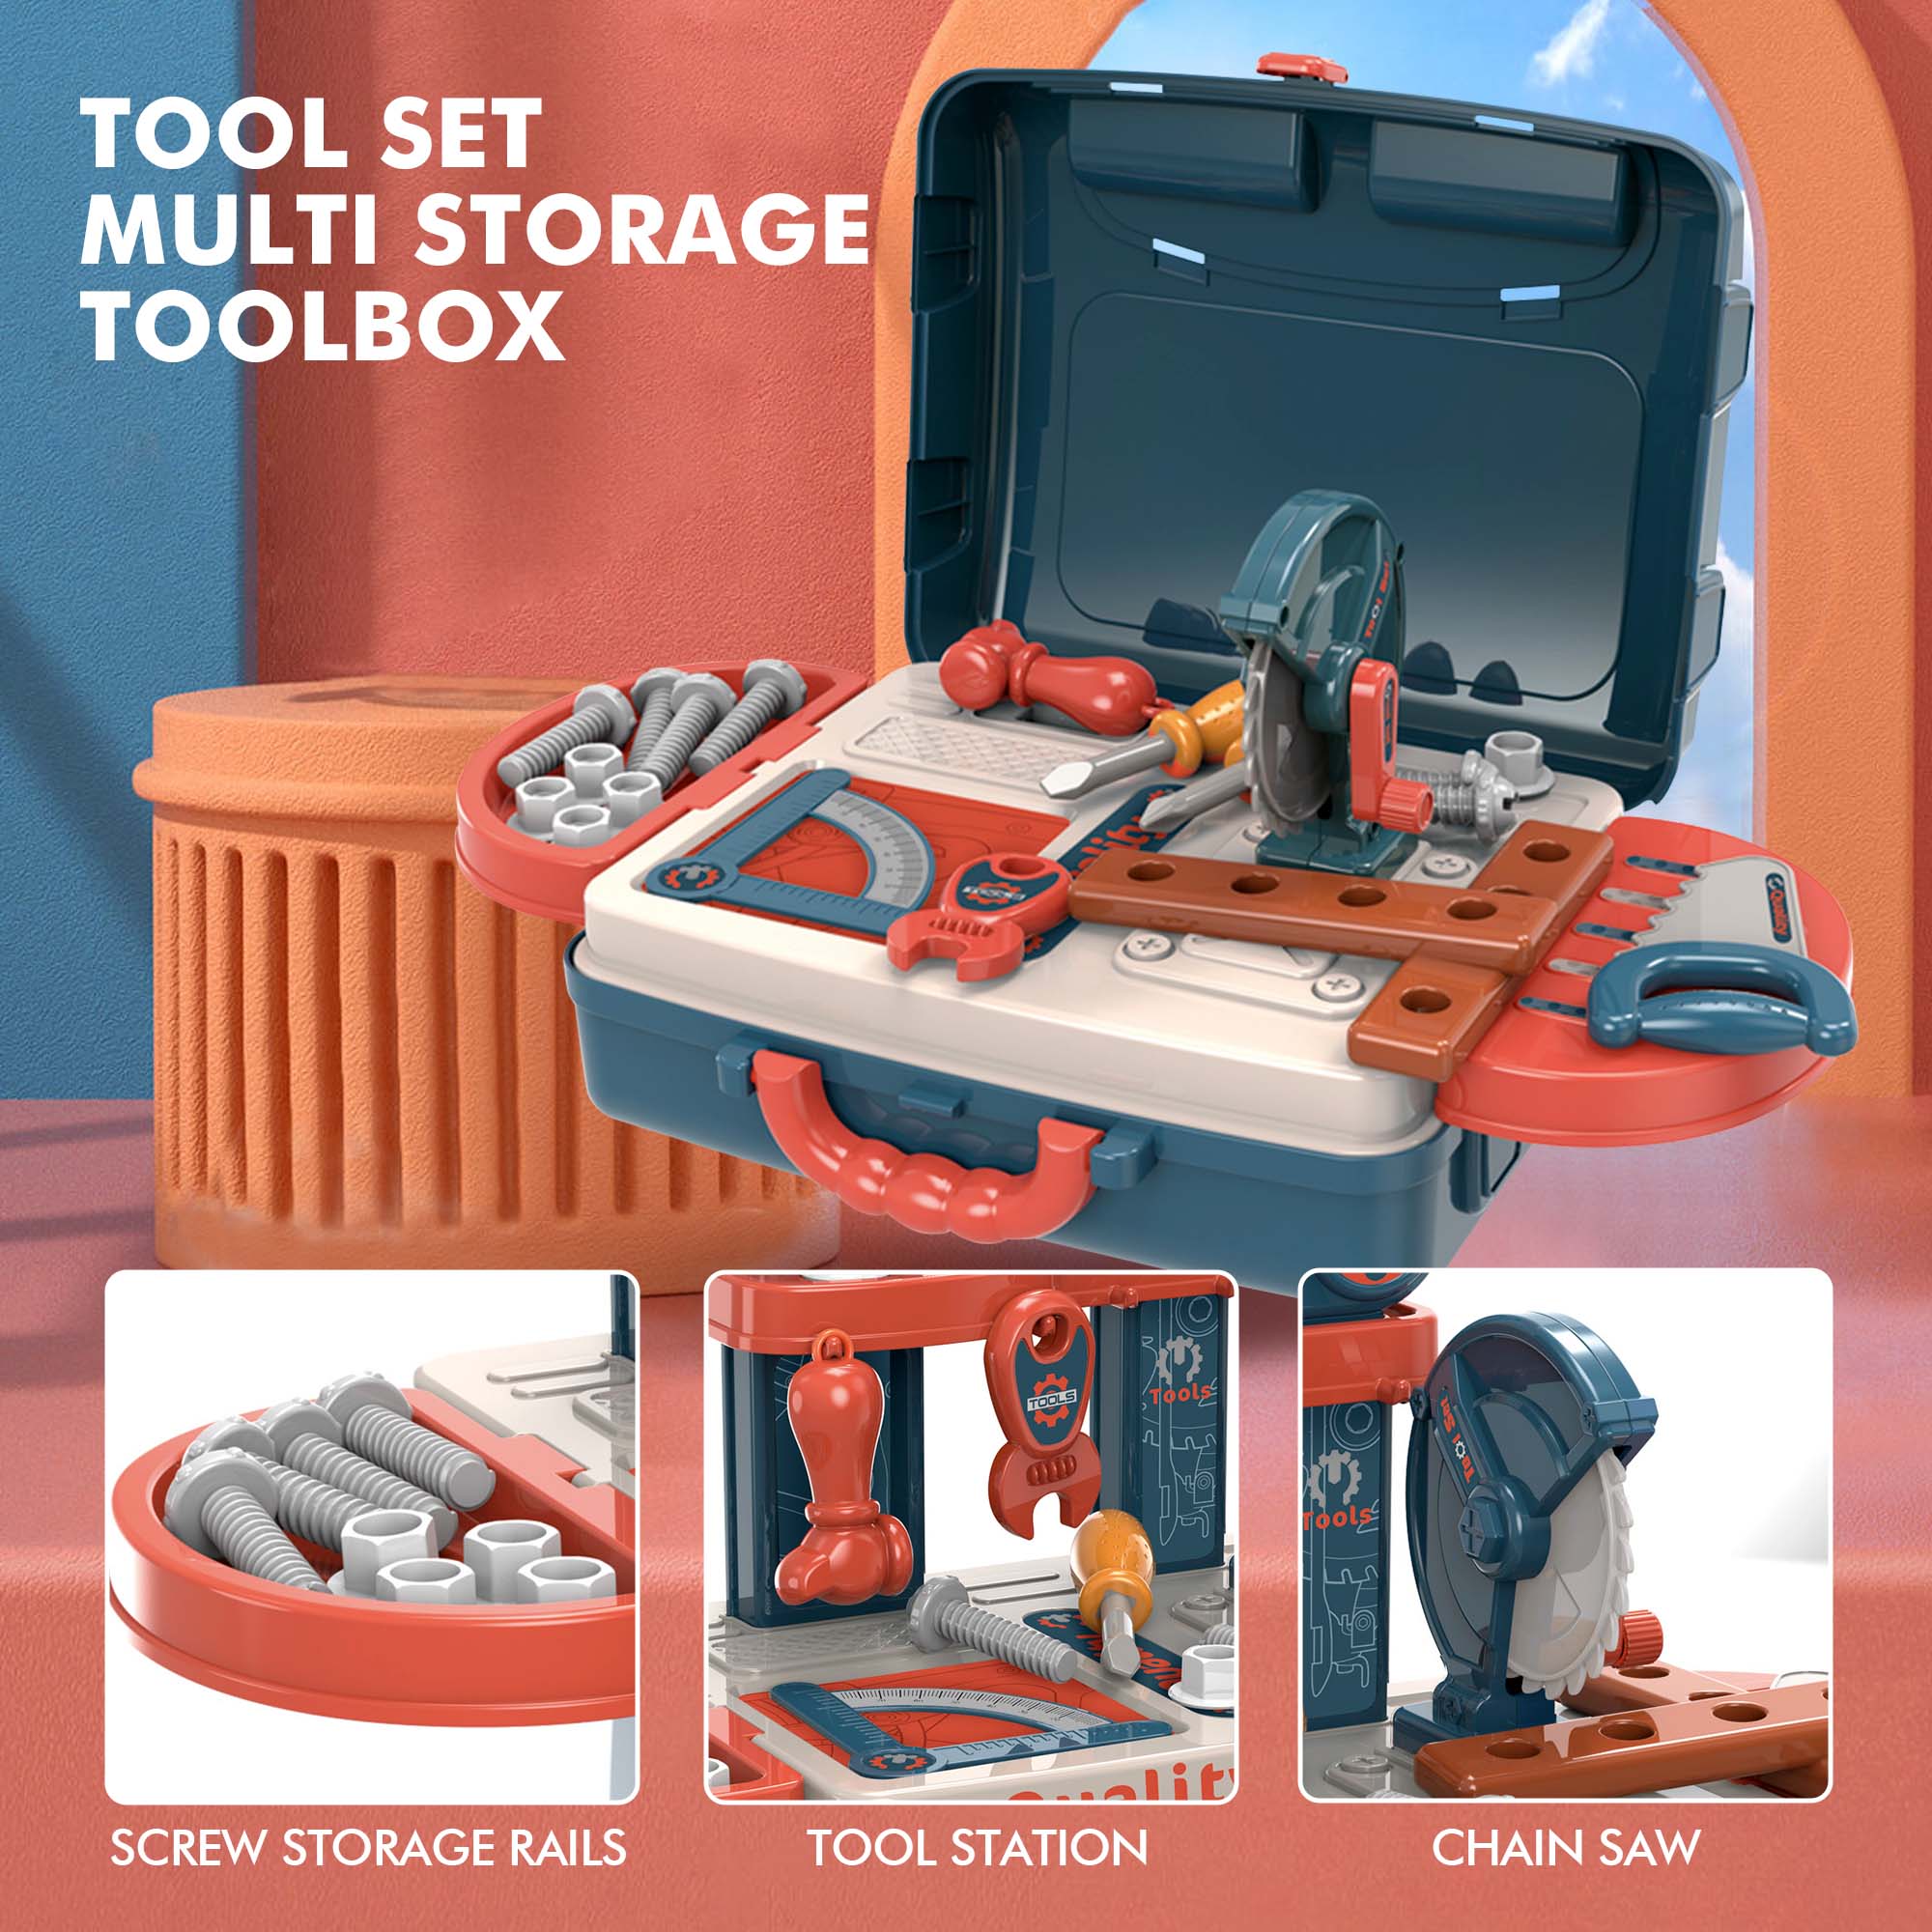 Kids Tool Set - 34 PCS Pretend Play Toolbox Toy Set for Toddler, Kids Tool Workbench Toys Construction Tool Kit Playset Accessories Gift for Girls Boys Ages 3 4 5 6 7 8 Years Old - image 2 of 9